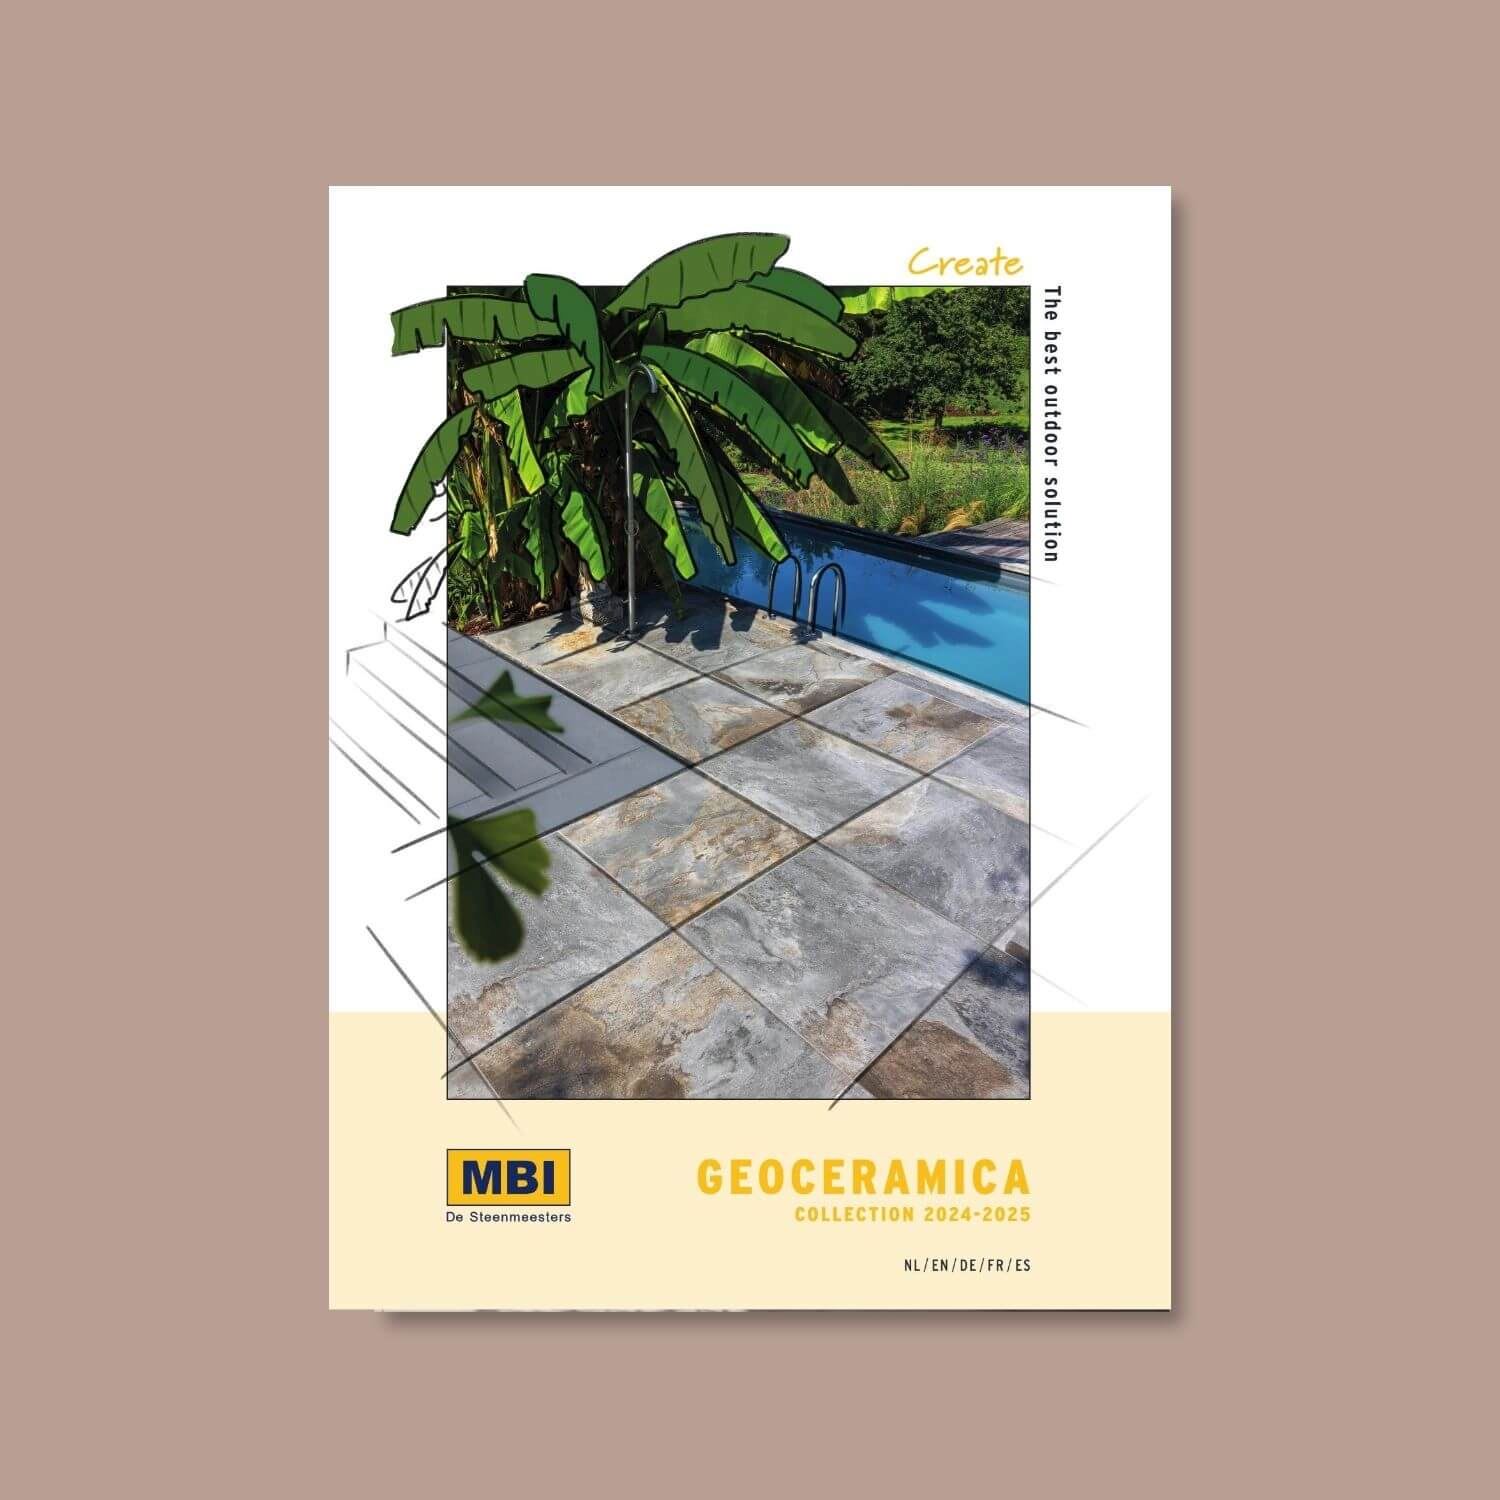 mbi-outdoor-collection-geoceramica-2024-2025